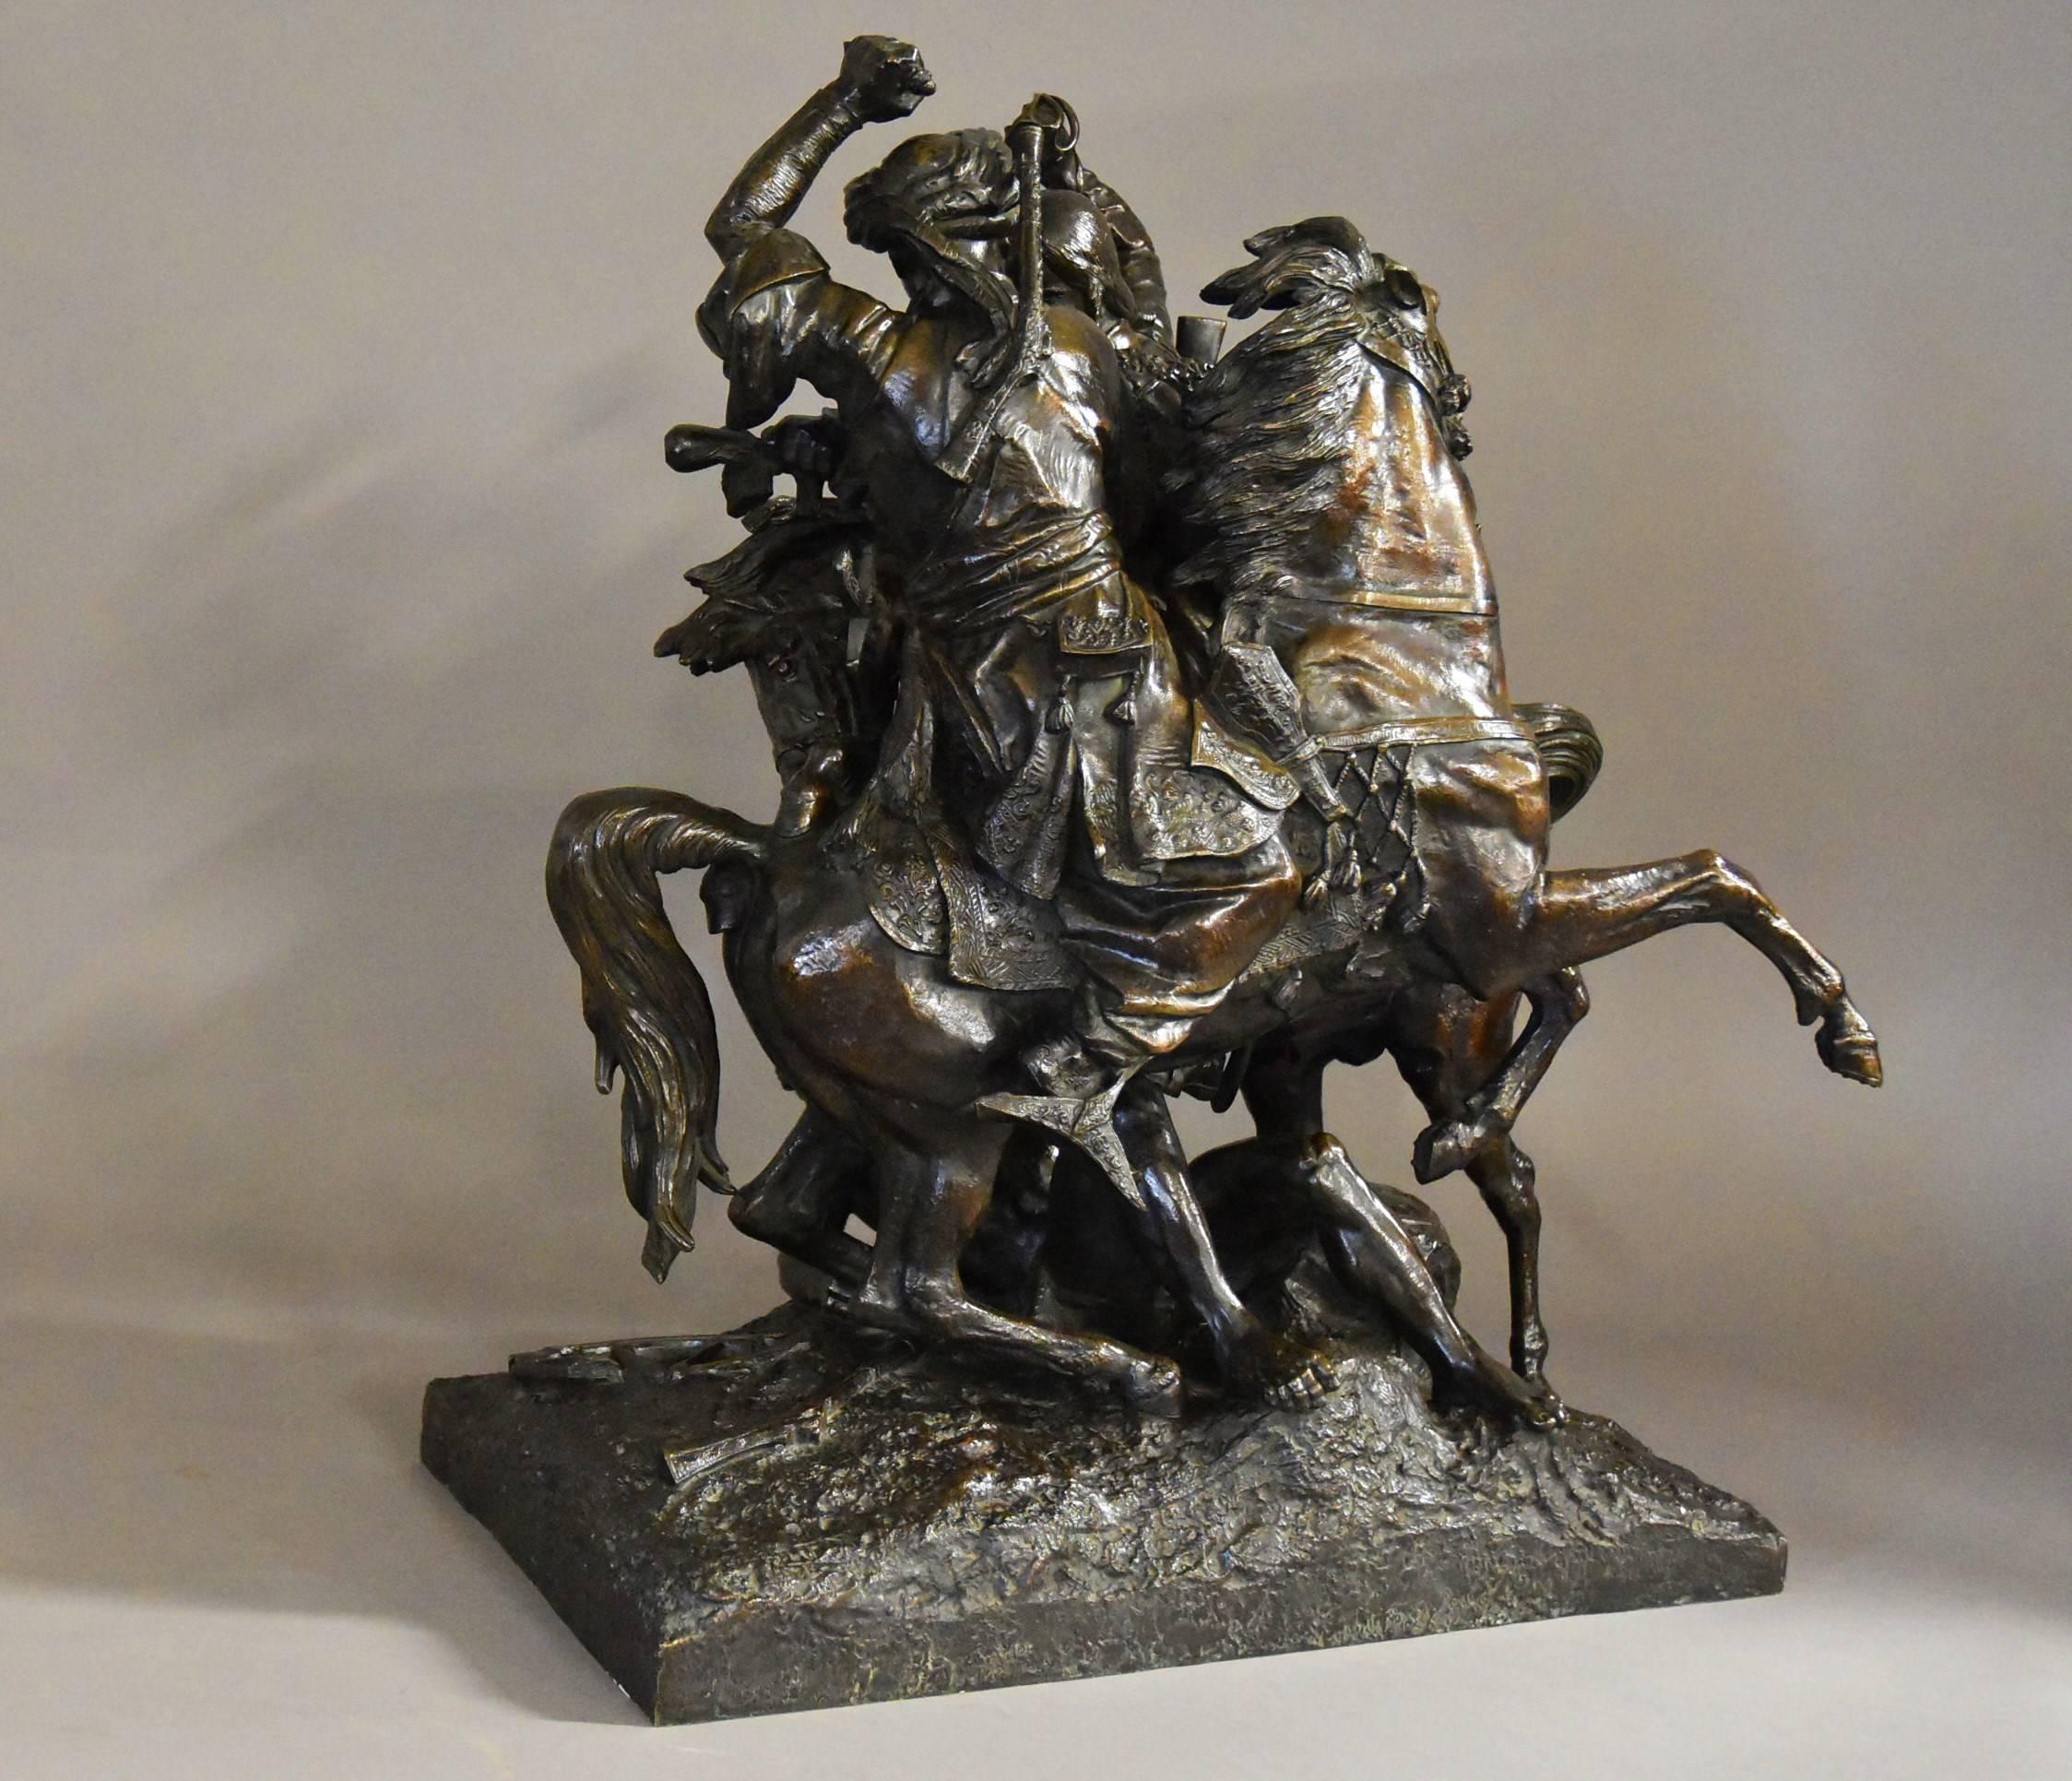 Large Fine Quality Patinated Bronze Sculpture Titled 'Aboukir' 1